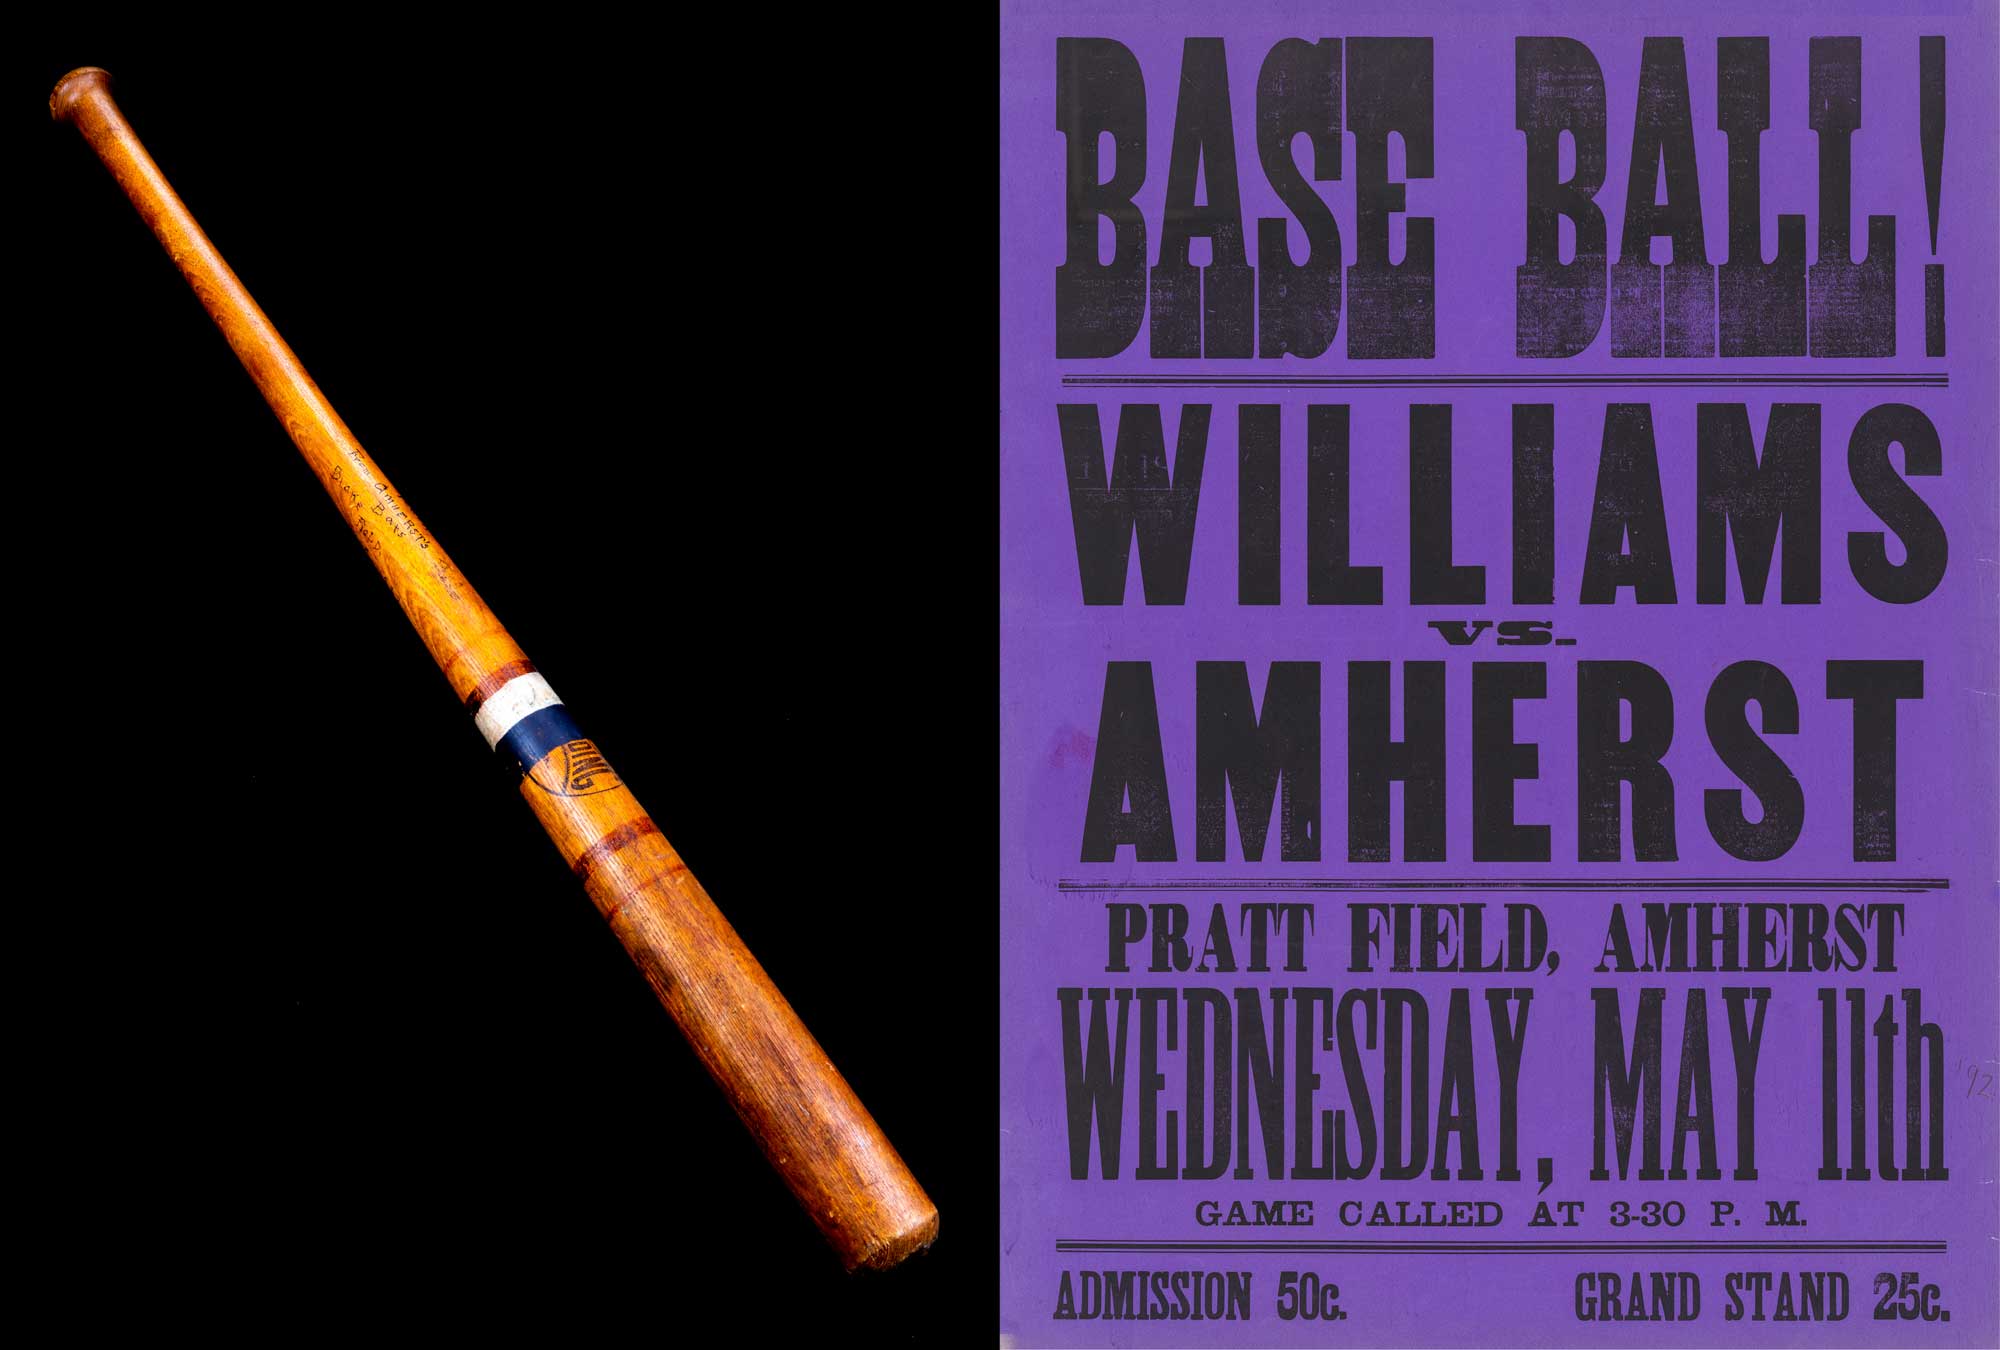 A baseball and a Williams vs Amherst baseball poster from the 1800s